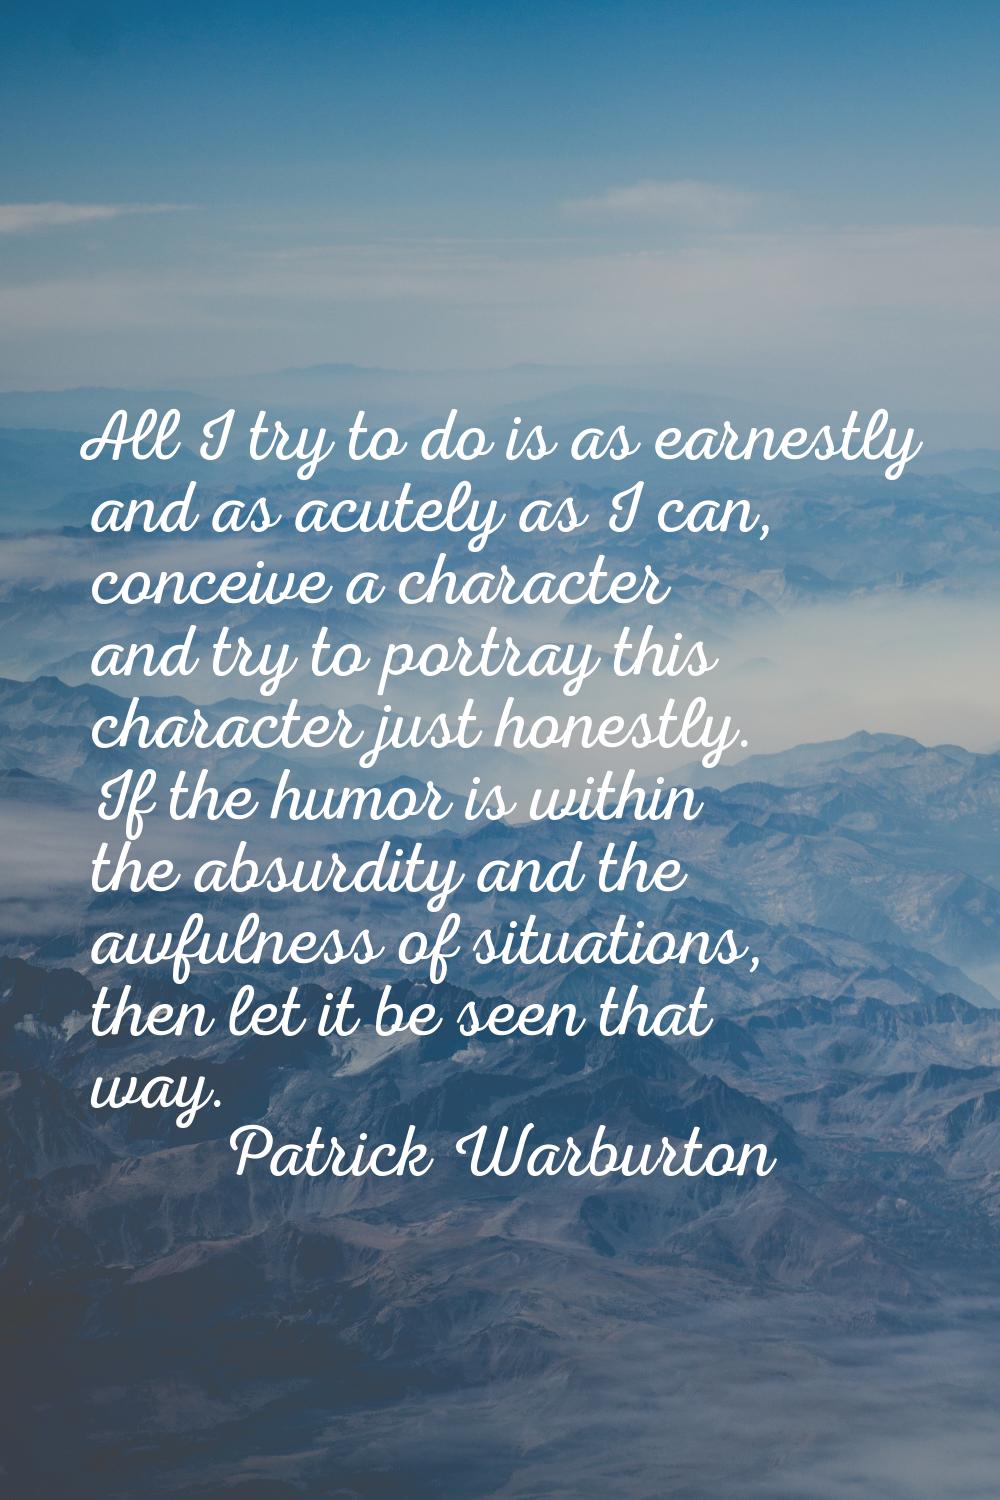 All I try to do is as earnestly and as acutely as I can, conceive a character and try to portray th